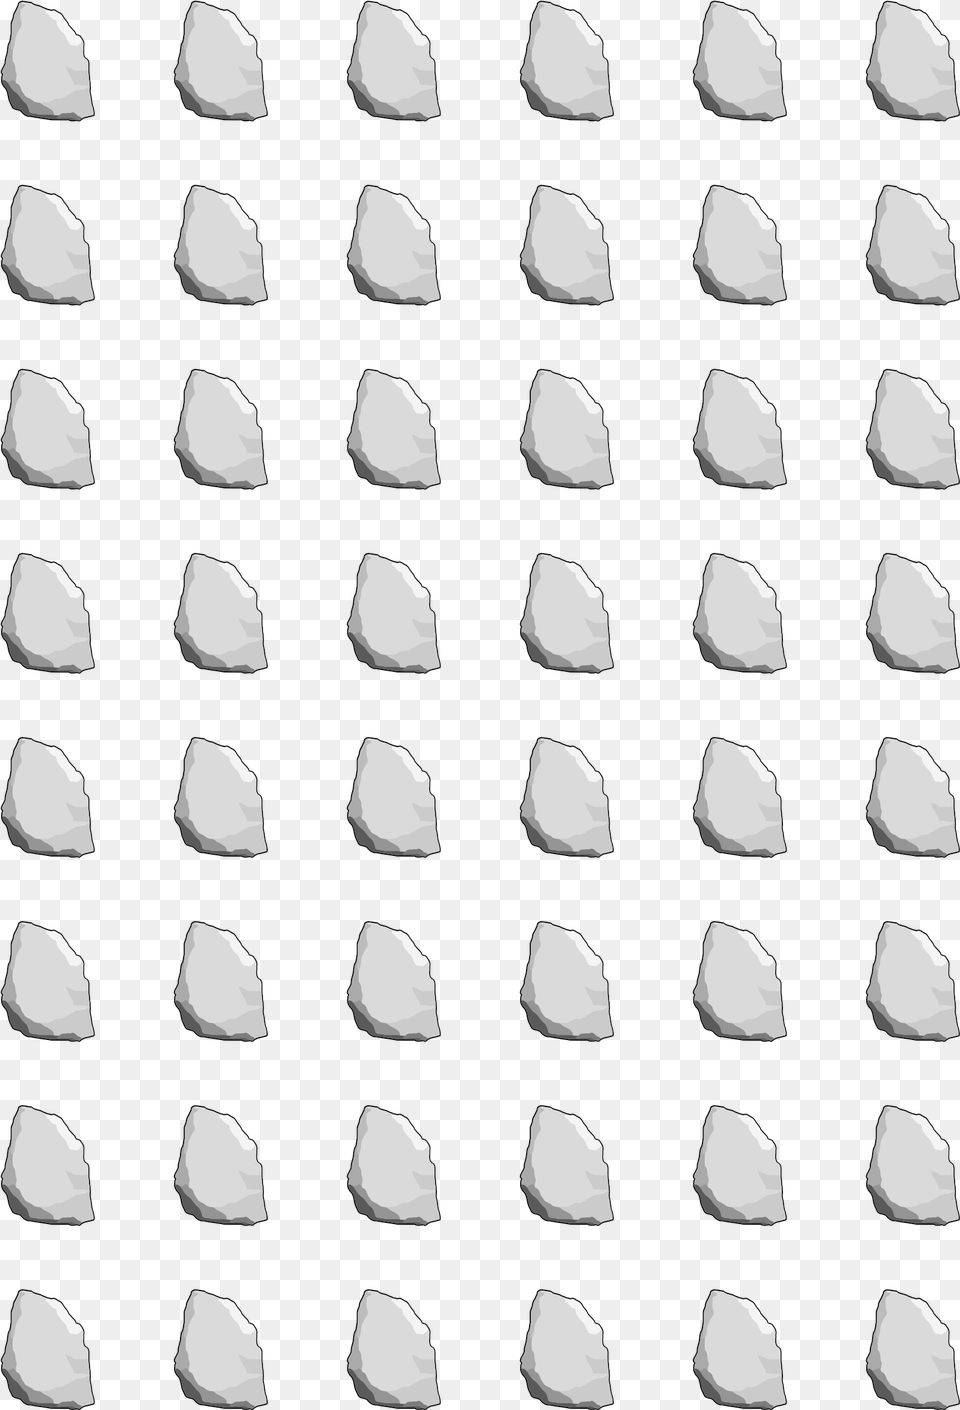 This Icons Design Of A4 Sheet Of Stones Without Chair, Pattern, Texture, Home Decor Free Transparent Png